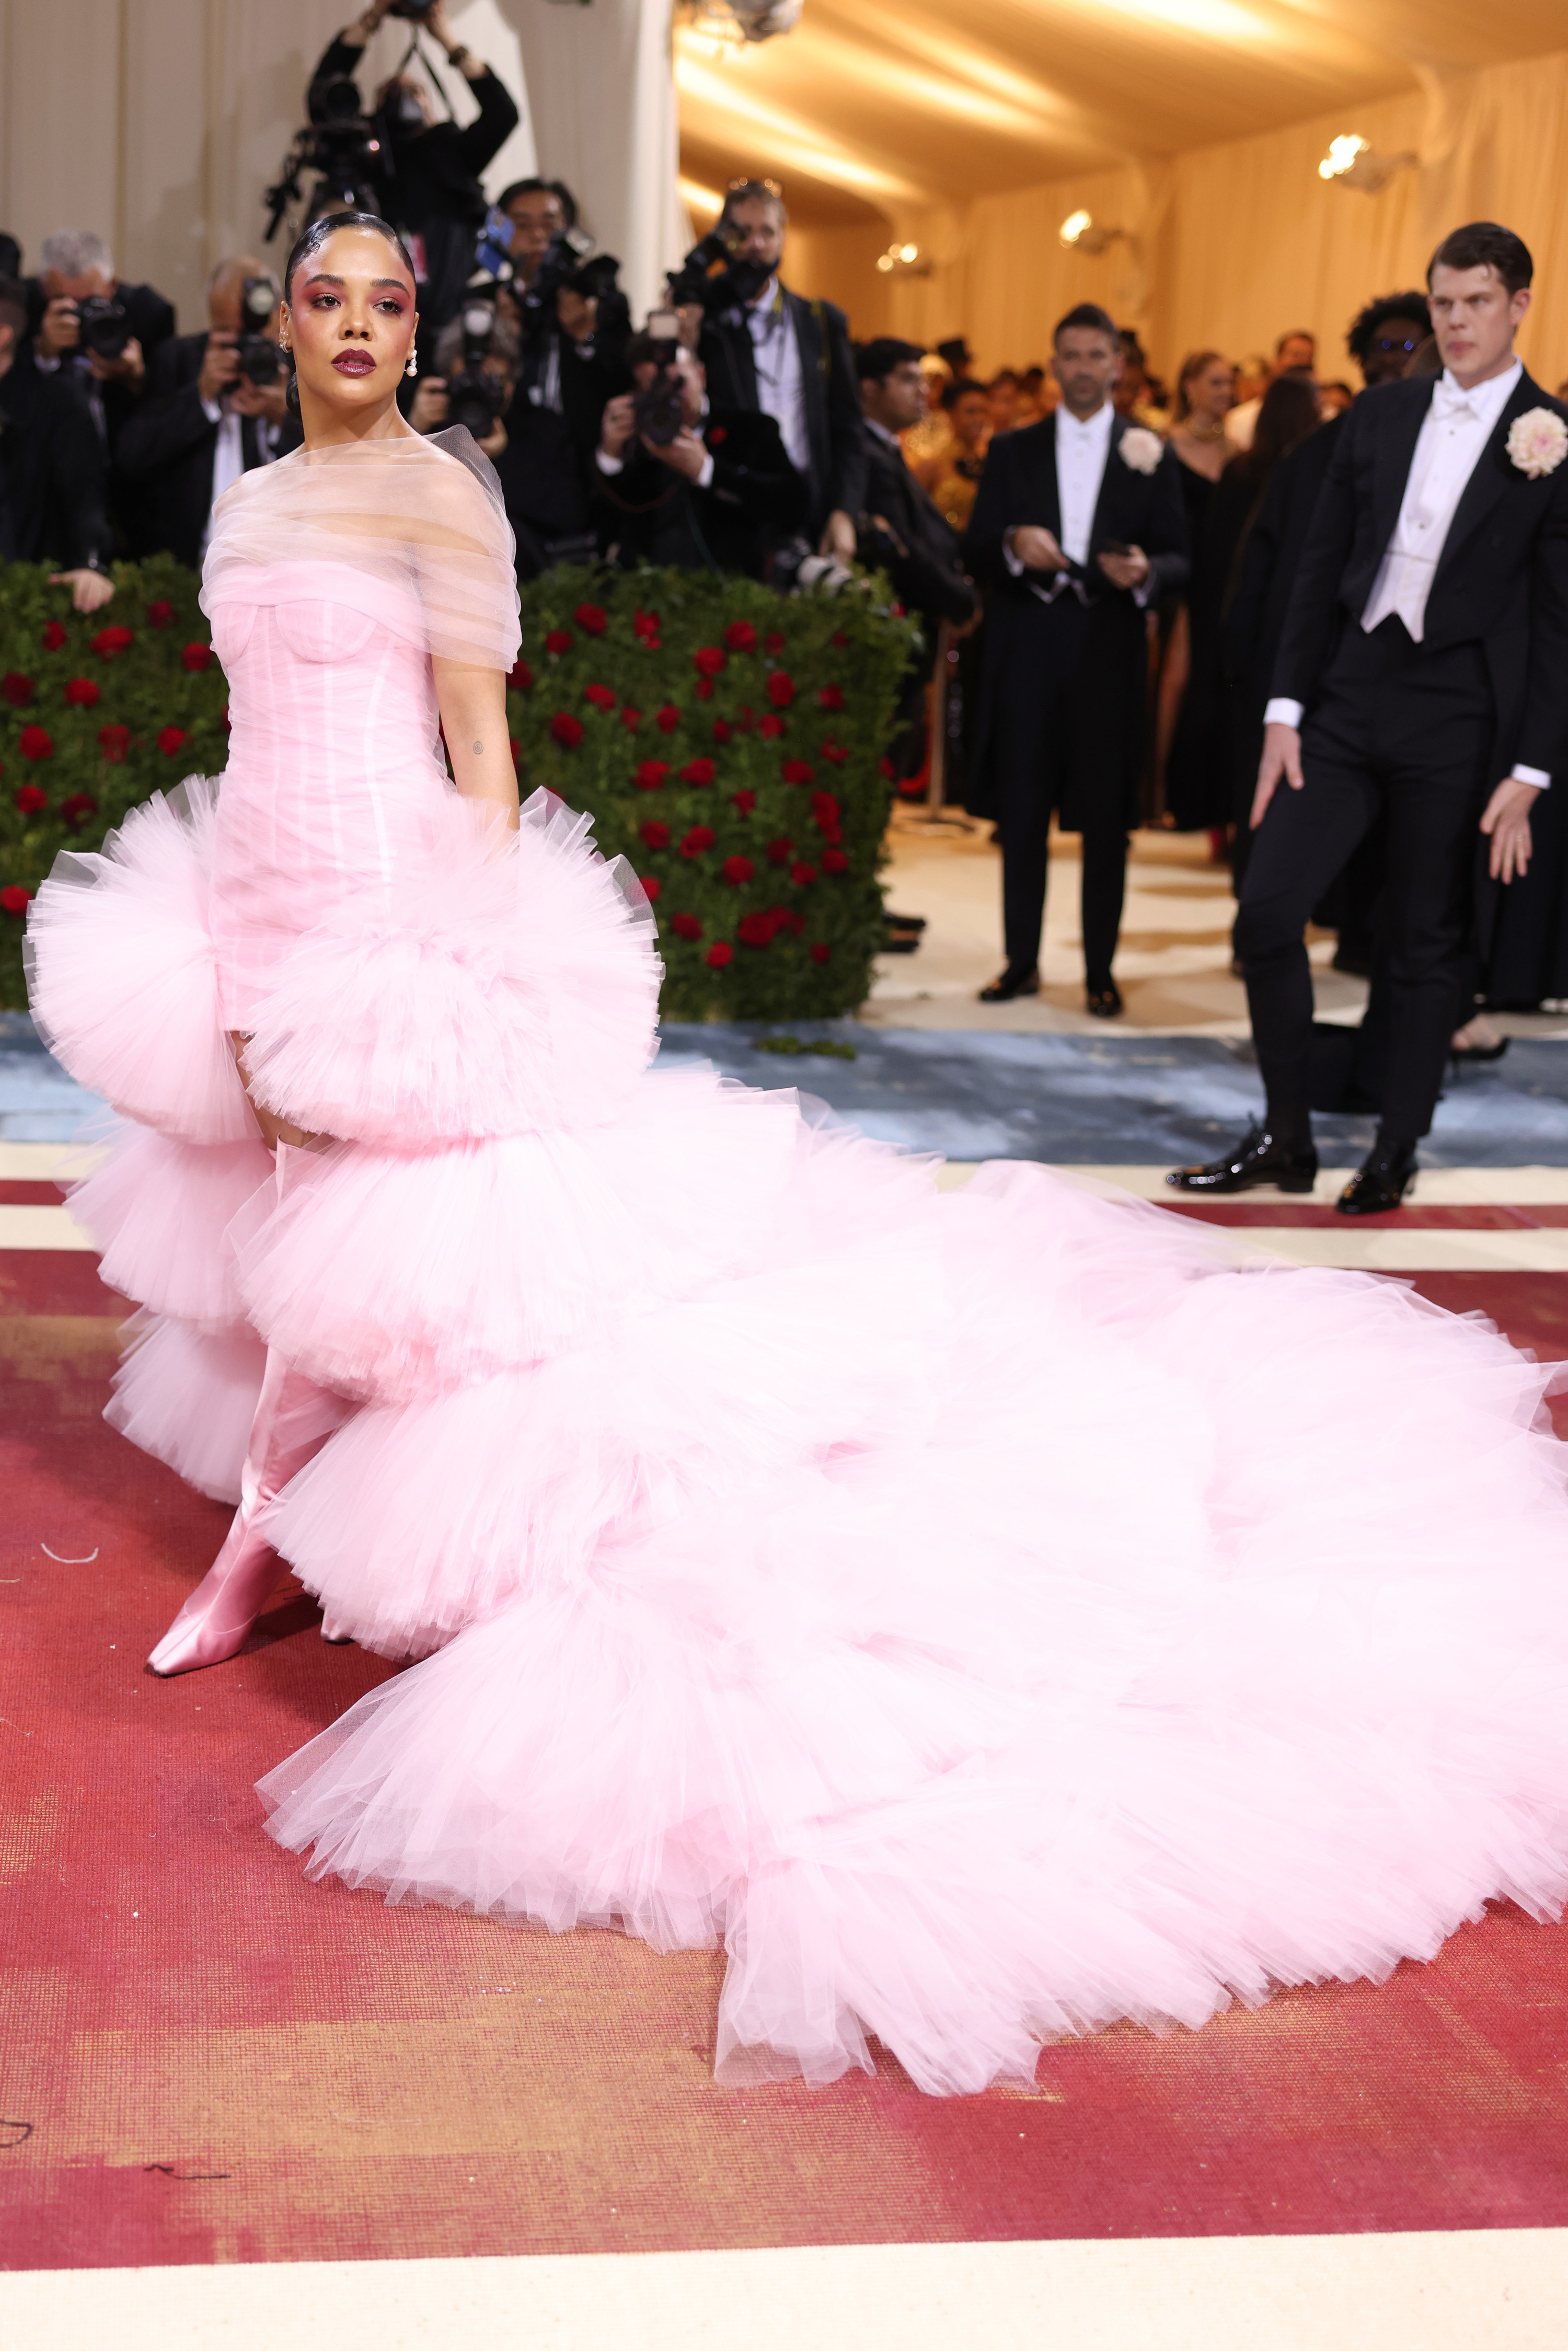 Tessa Thompson poses at the Met Gala on May 02, 2022